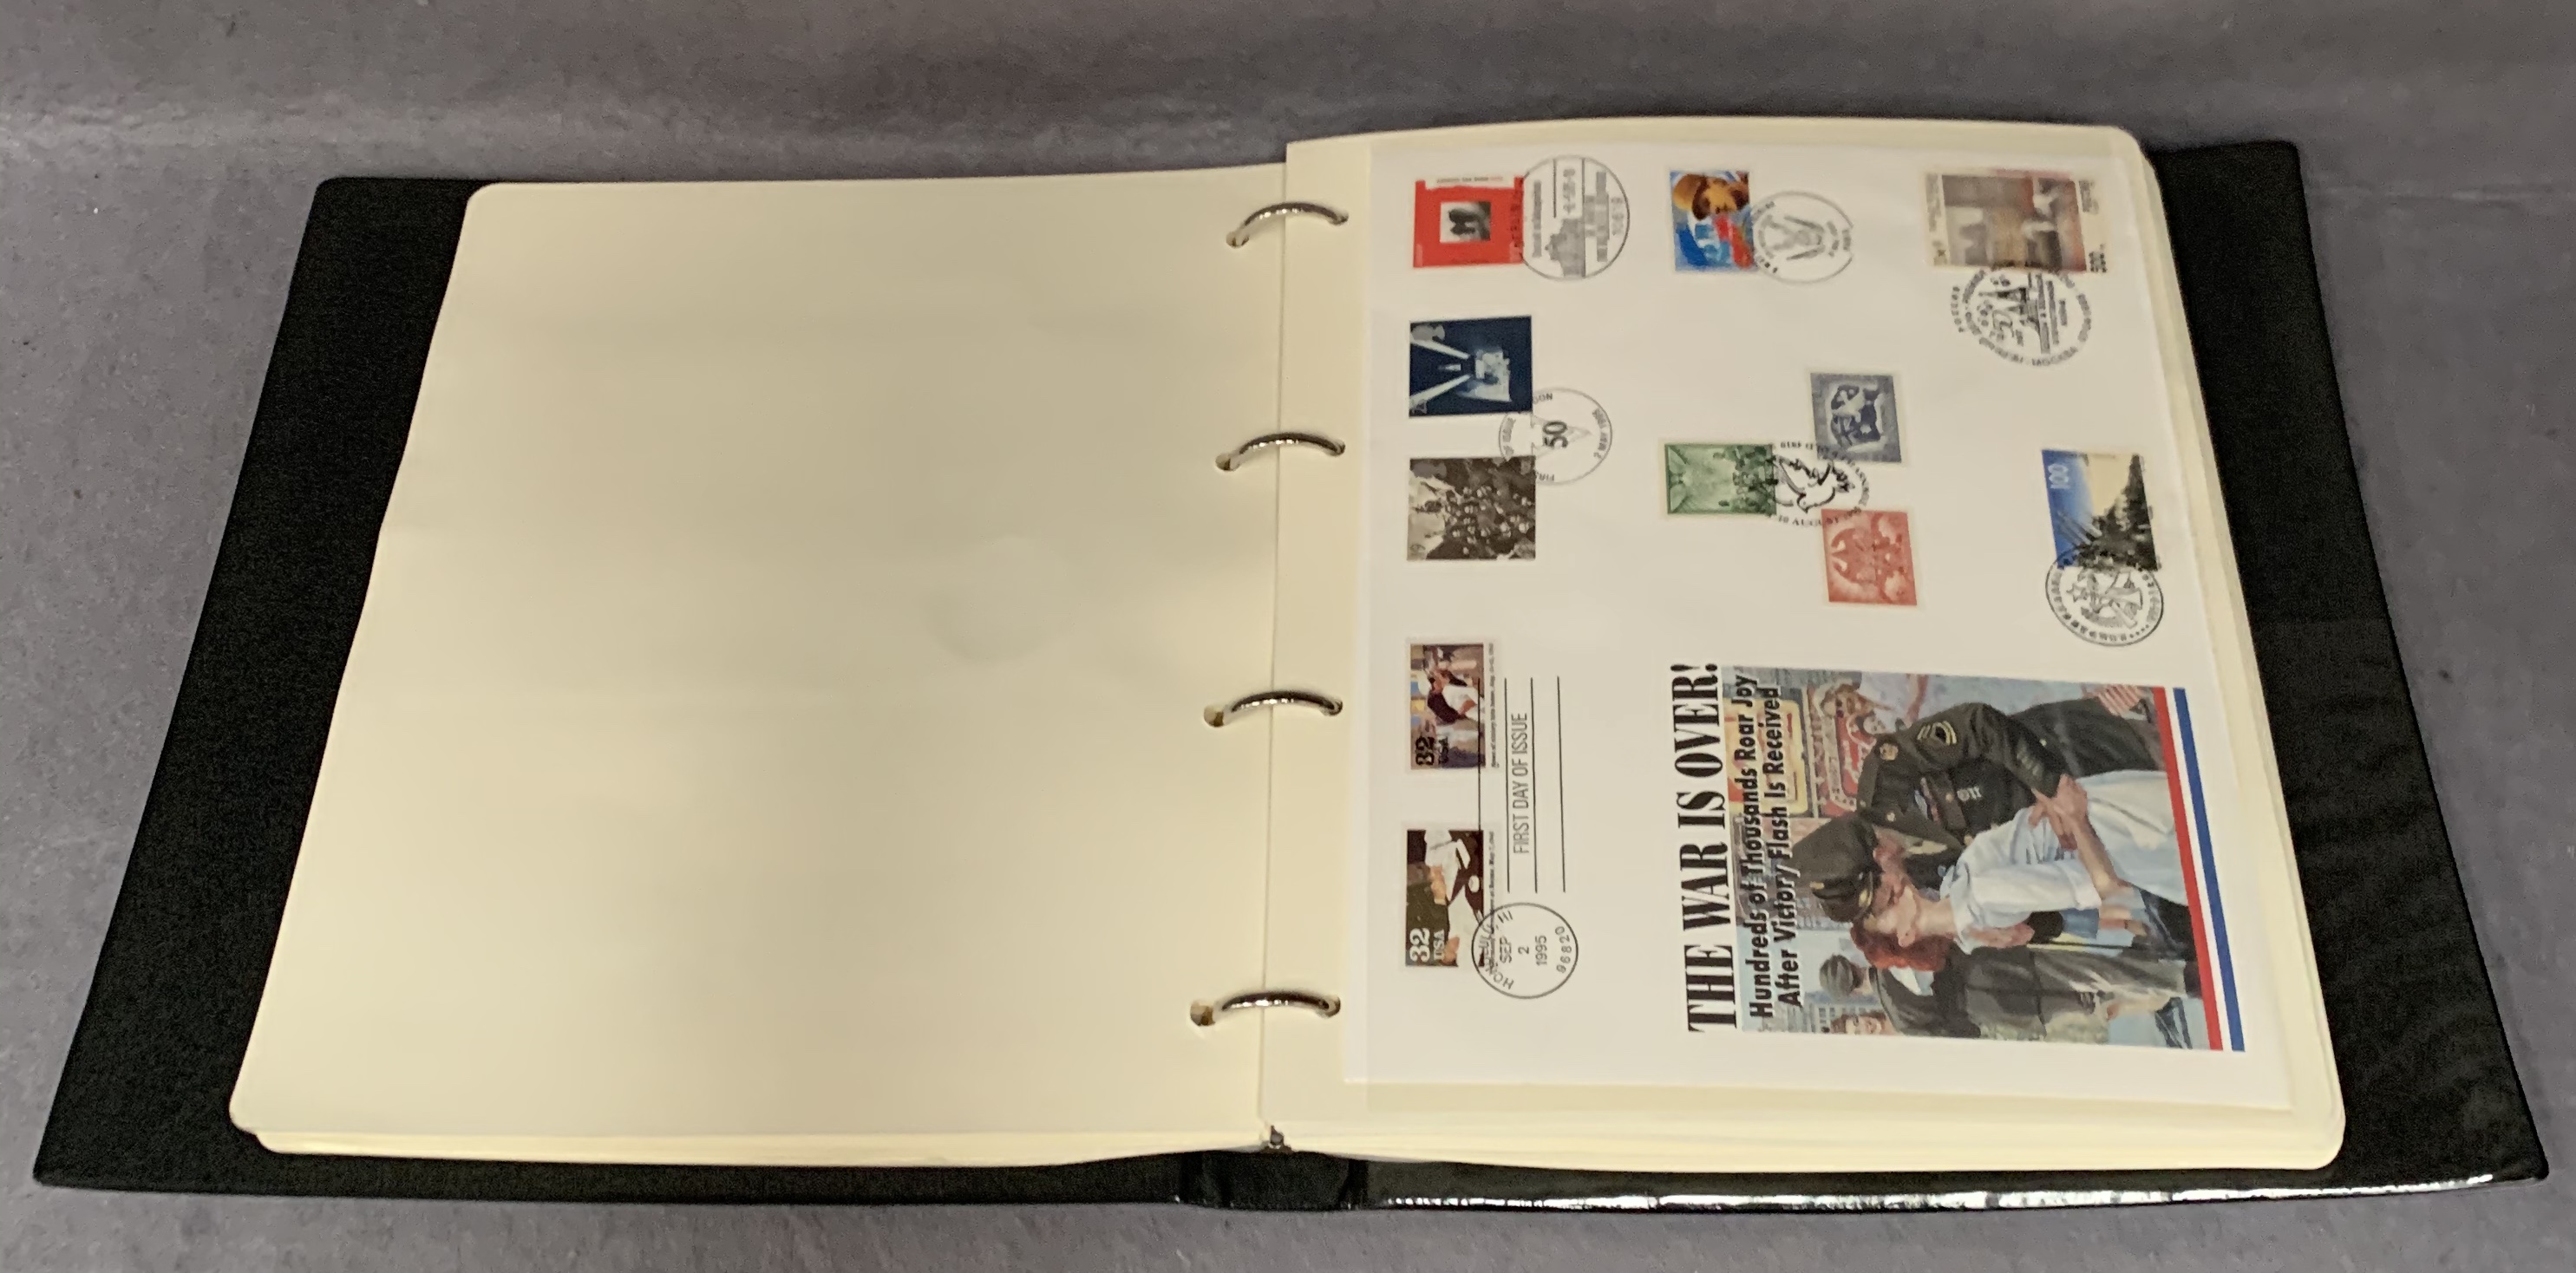 A Westminster album containing The History of World War II stamp and coin commemorative covers